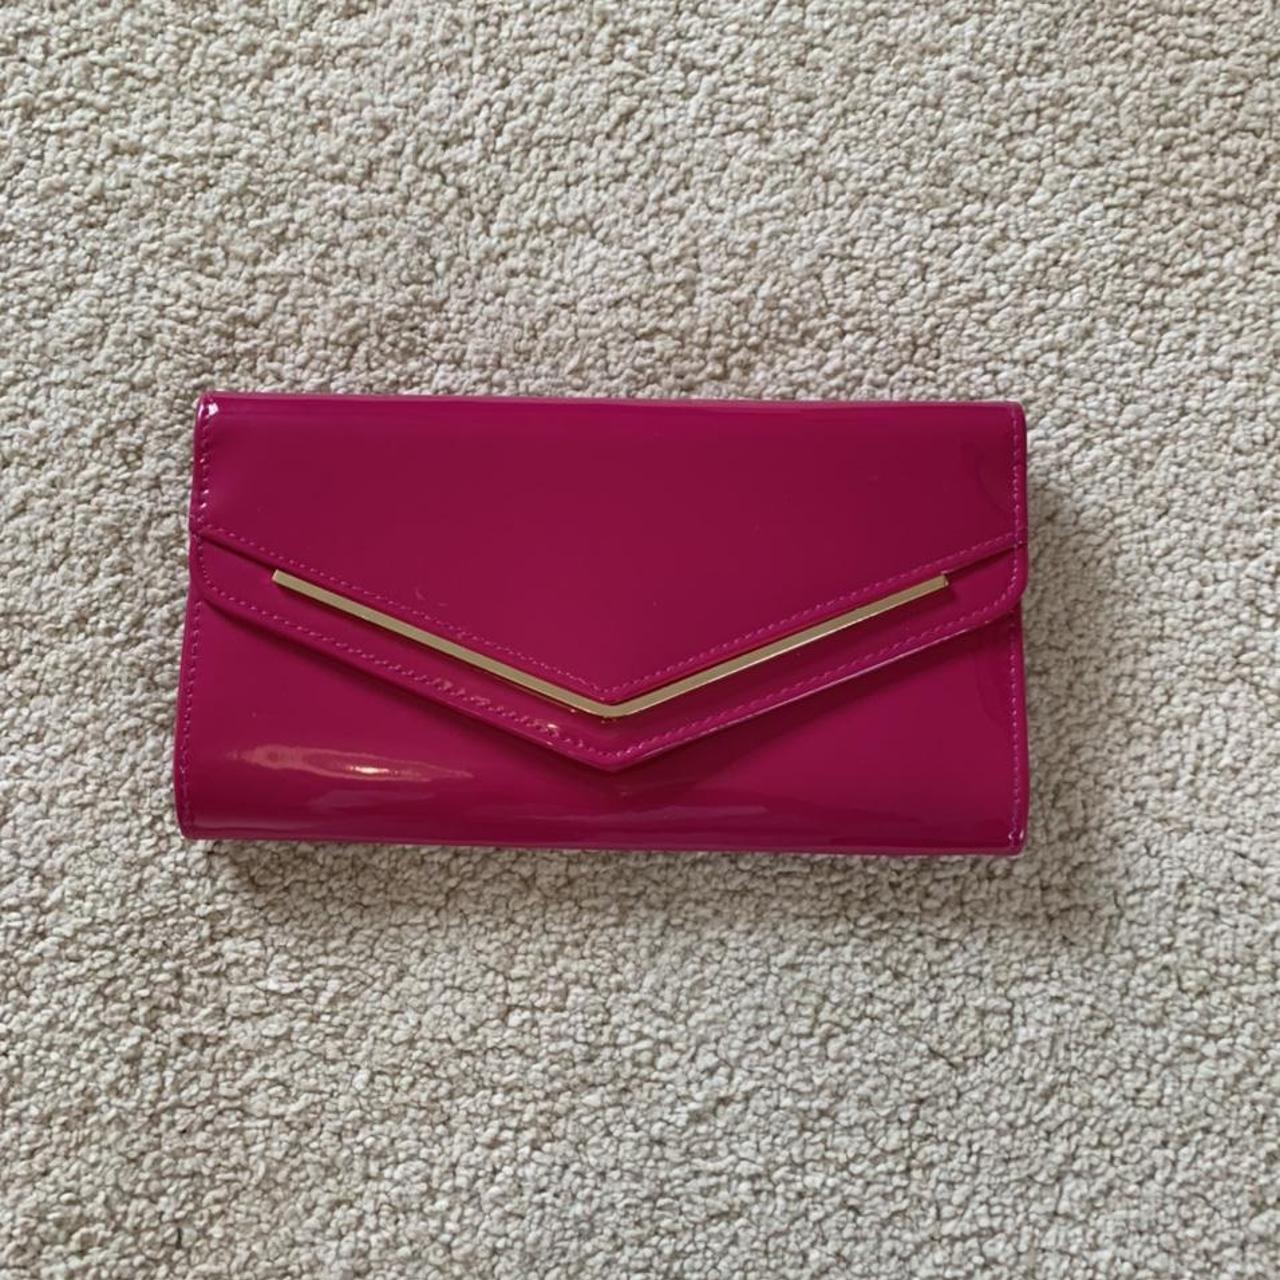 Aldo pink and gold evening bag. Clutch bad with... - Depop